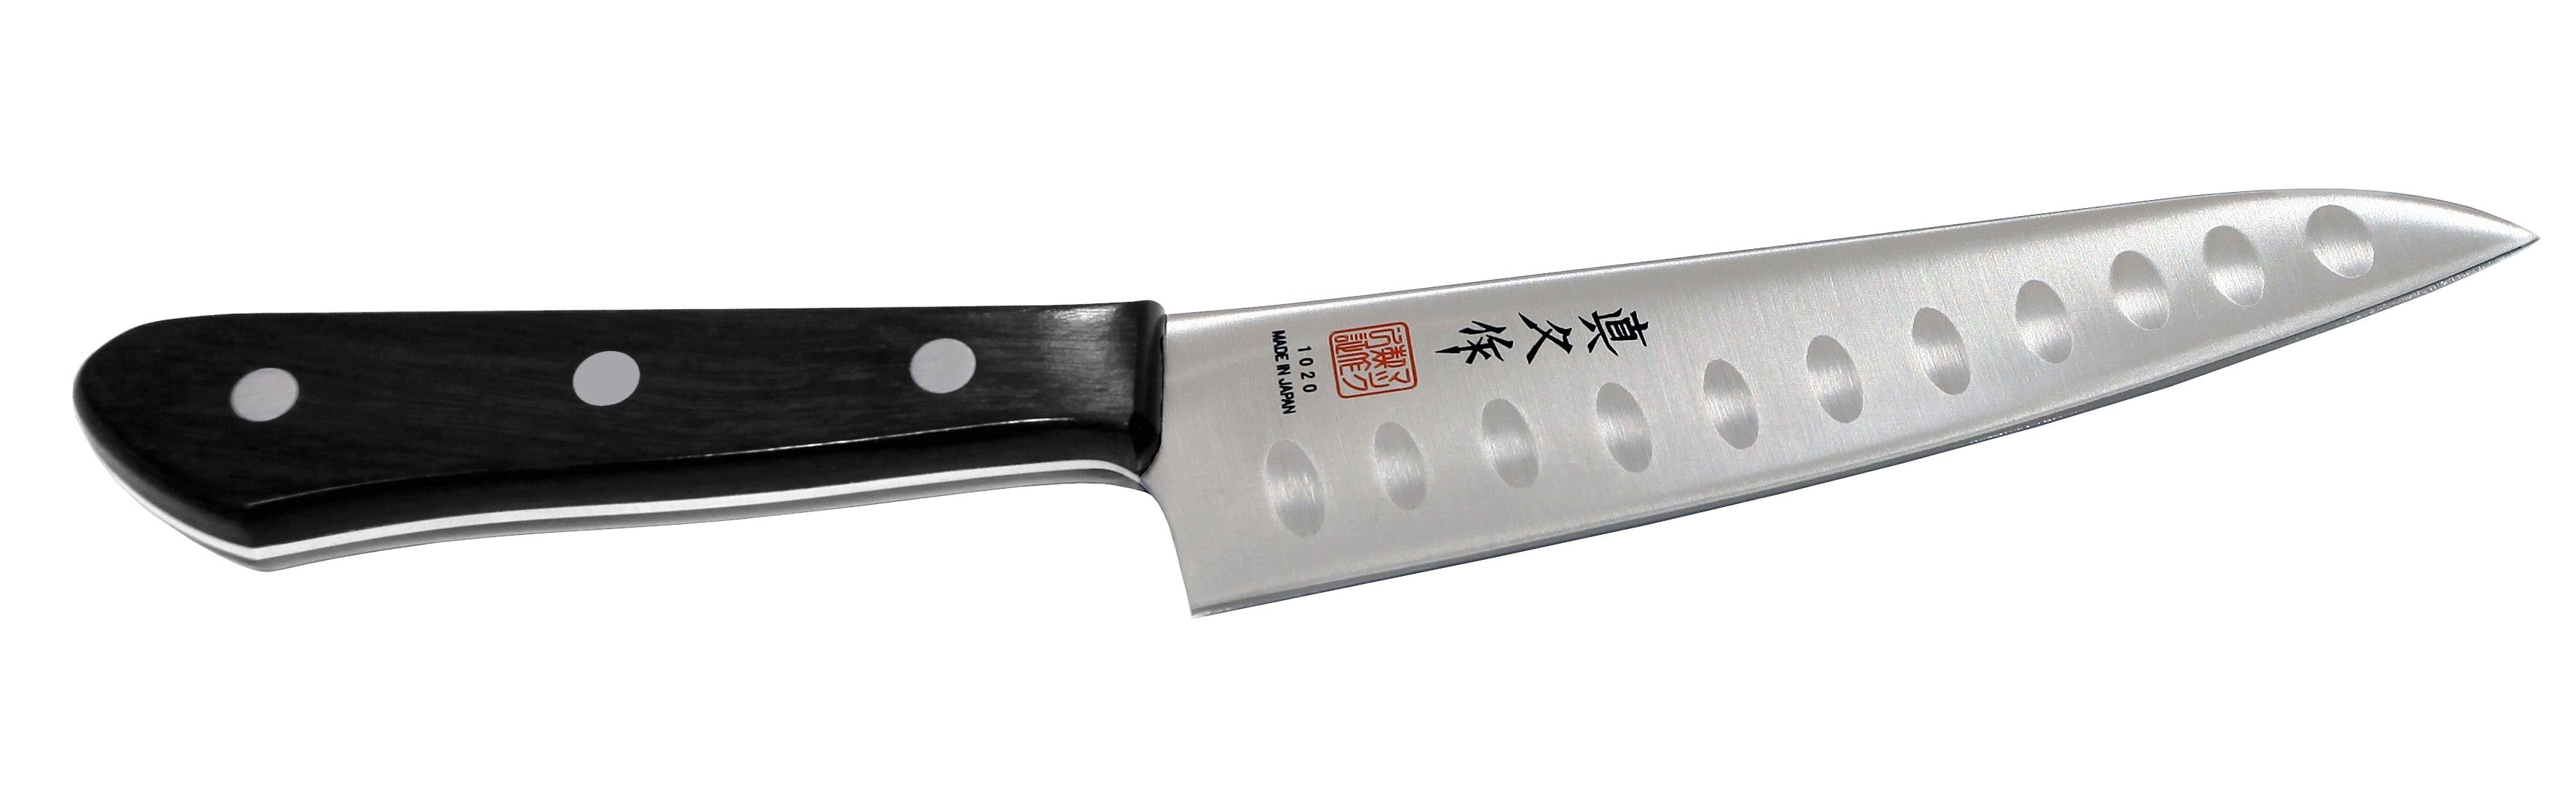 Professional Chef Knife 20cm blade, Ceramic Kitchen Knives and Tools